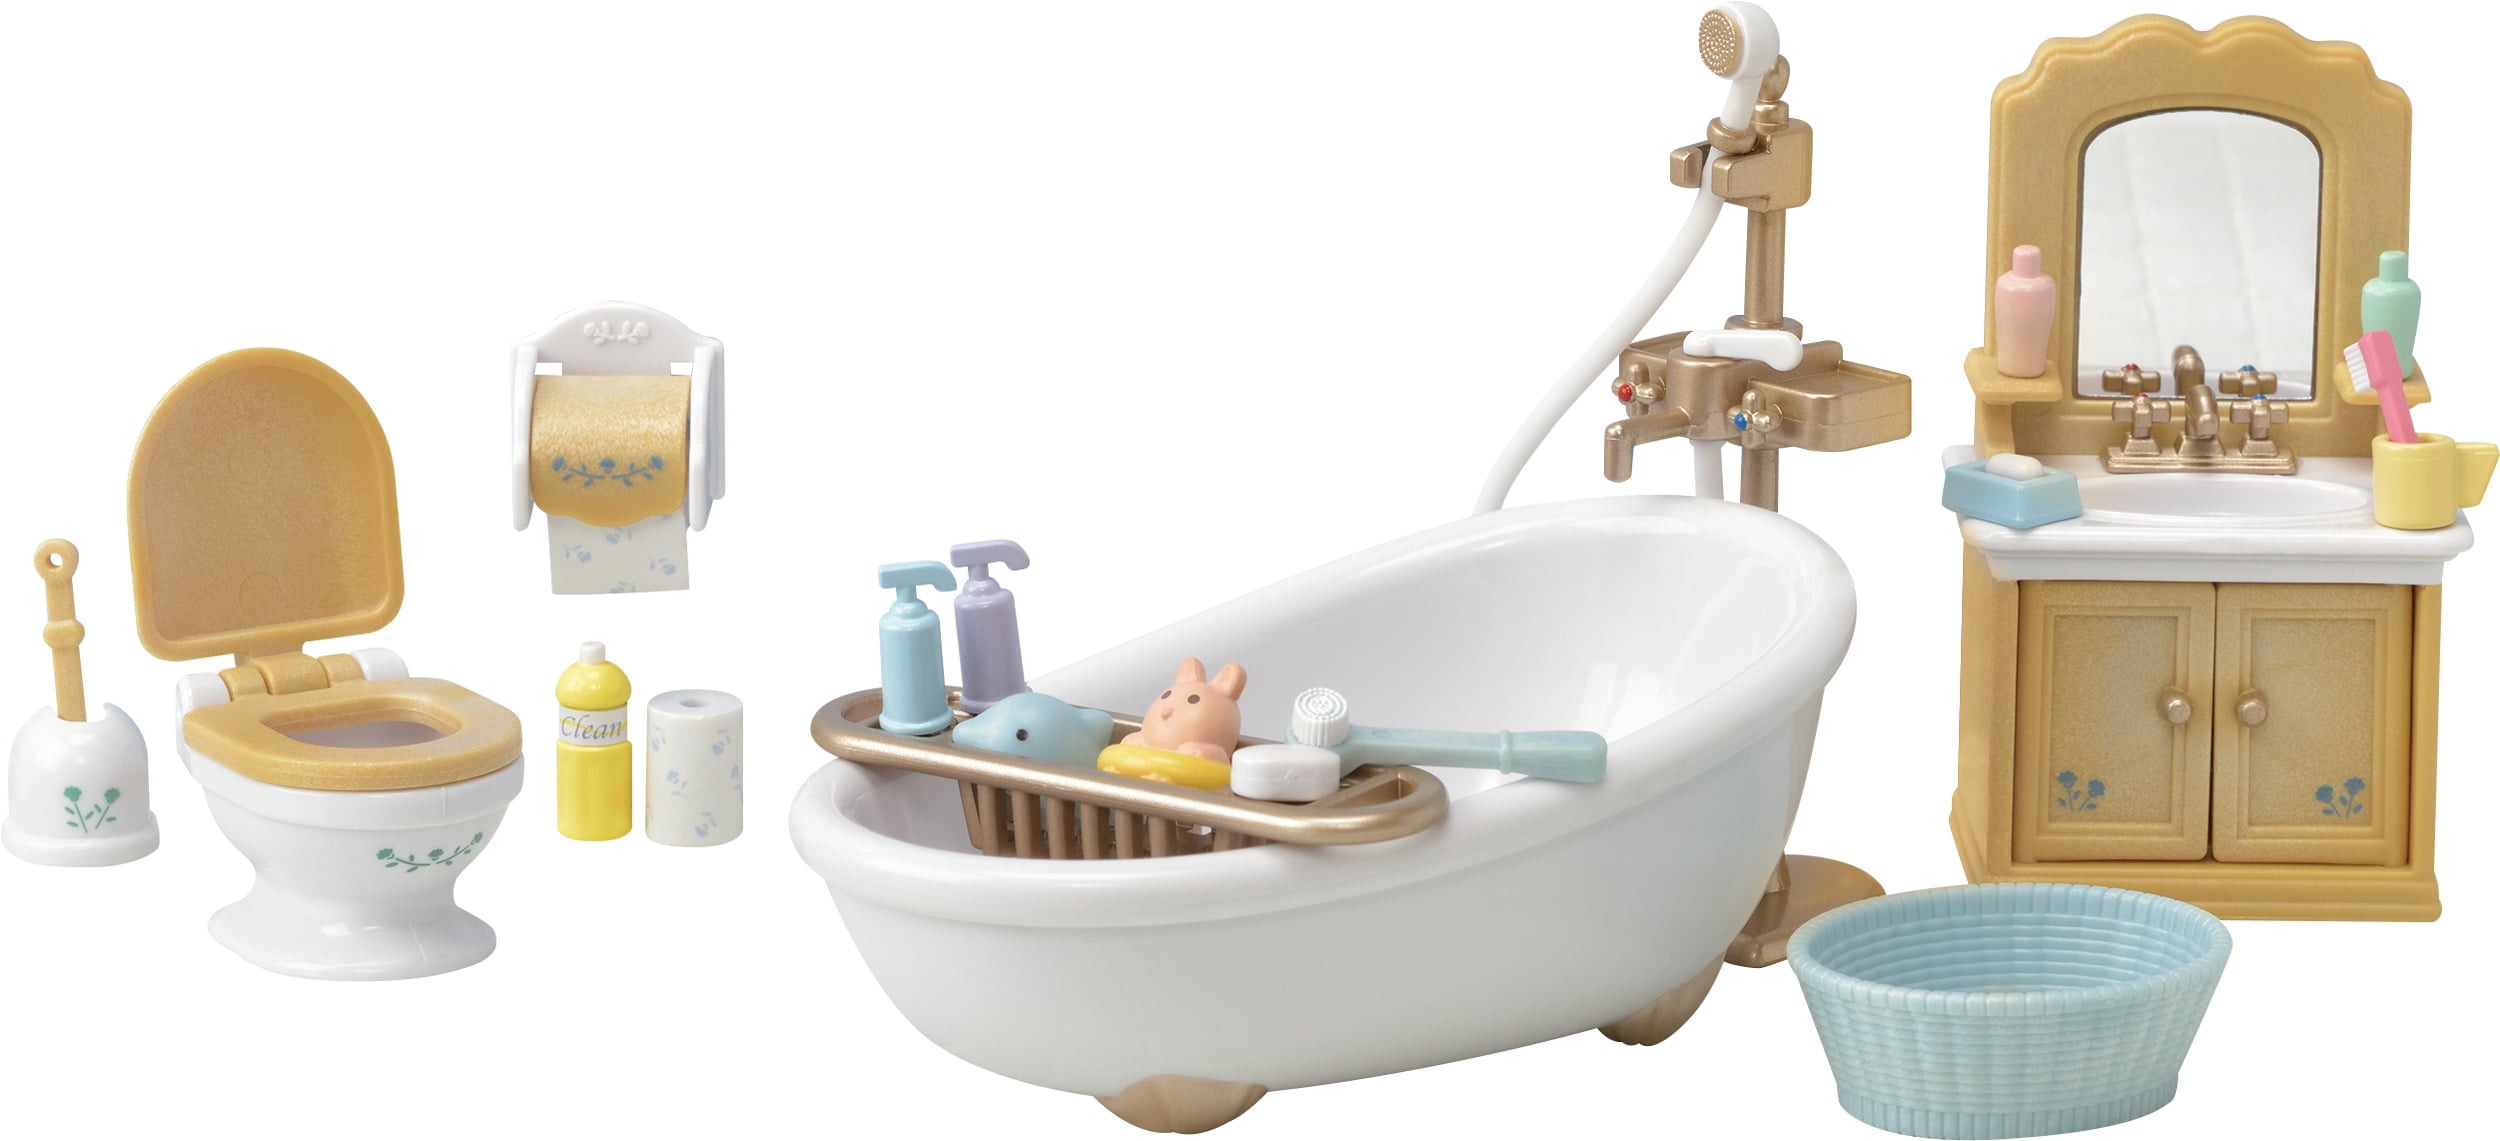 Calico Critters Country Bathroom Set Furniture Accessories